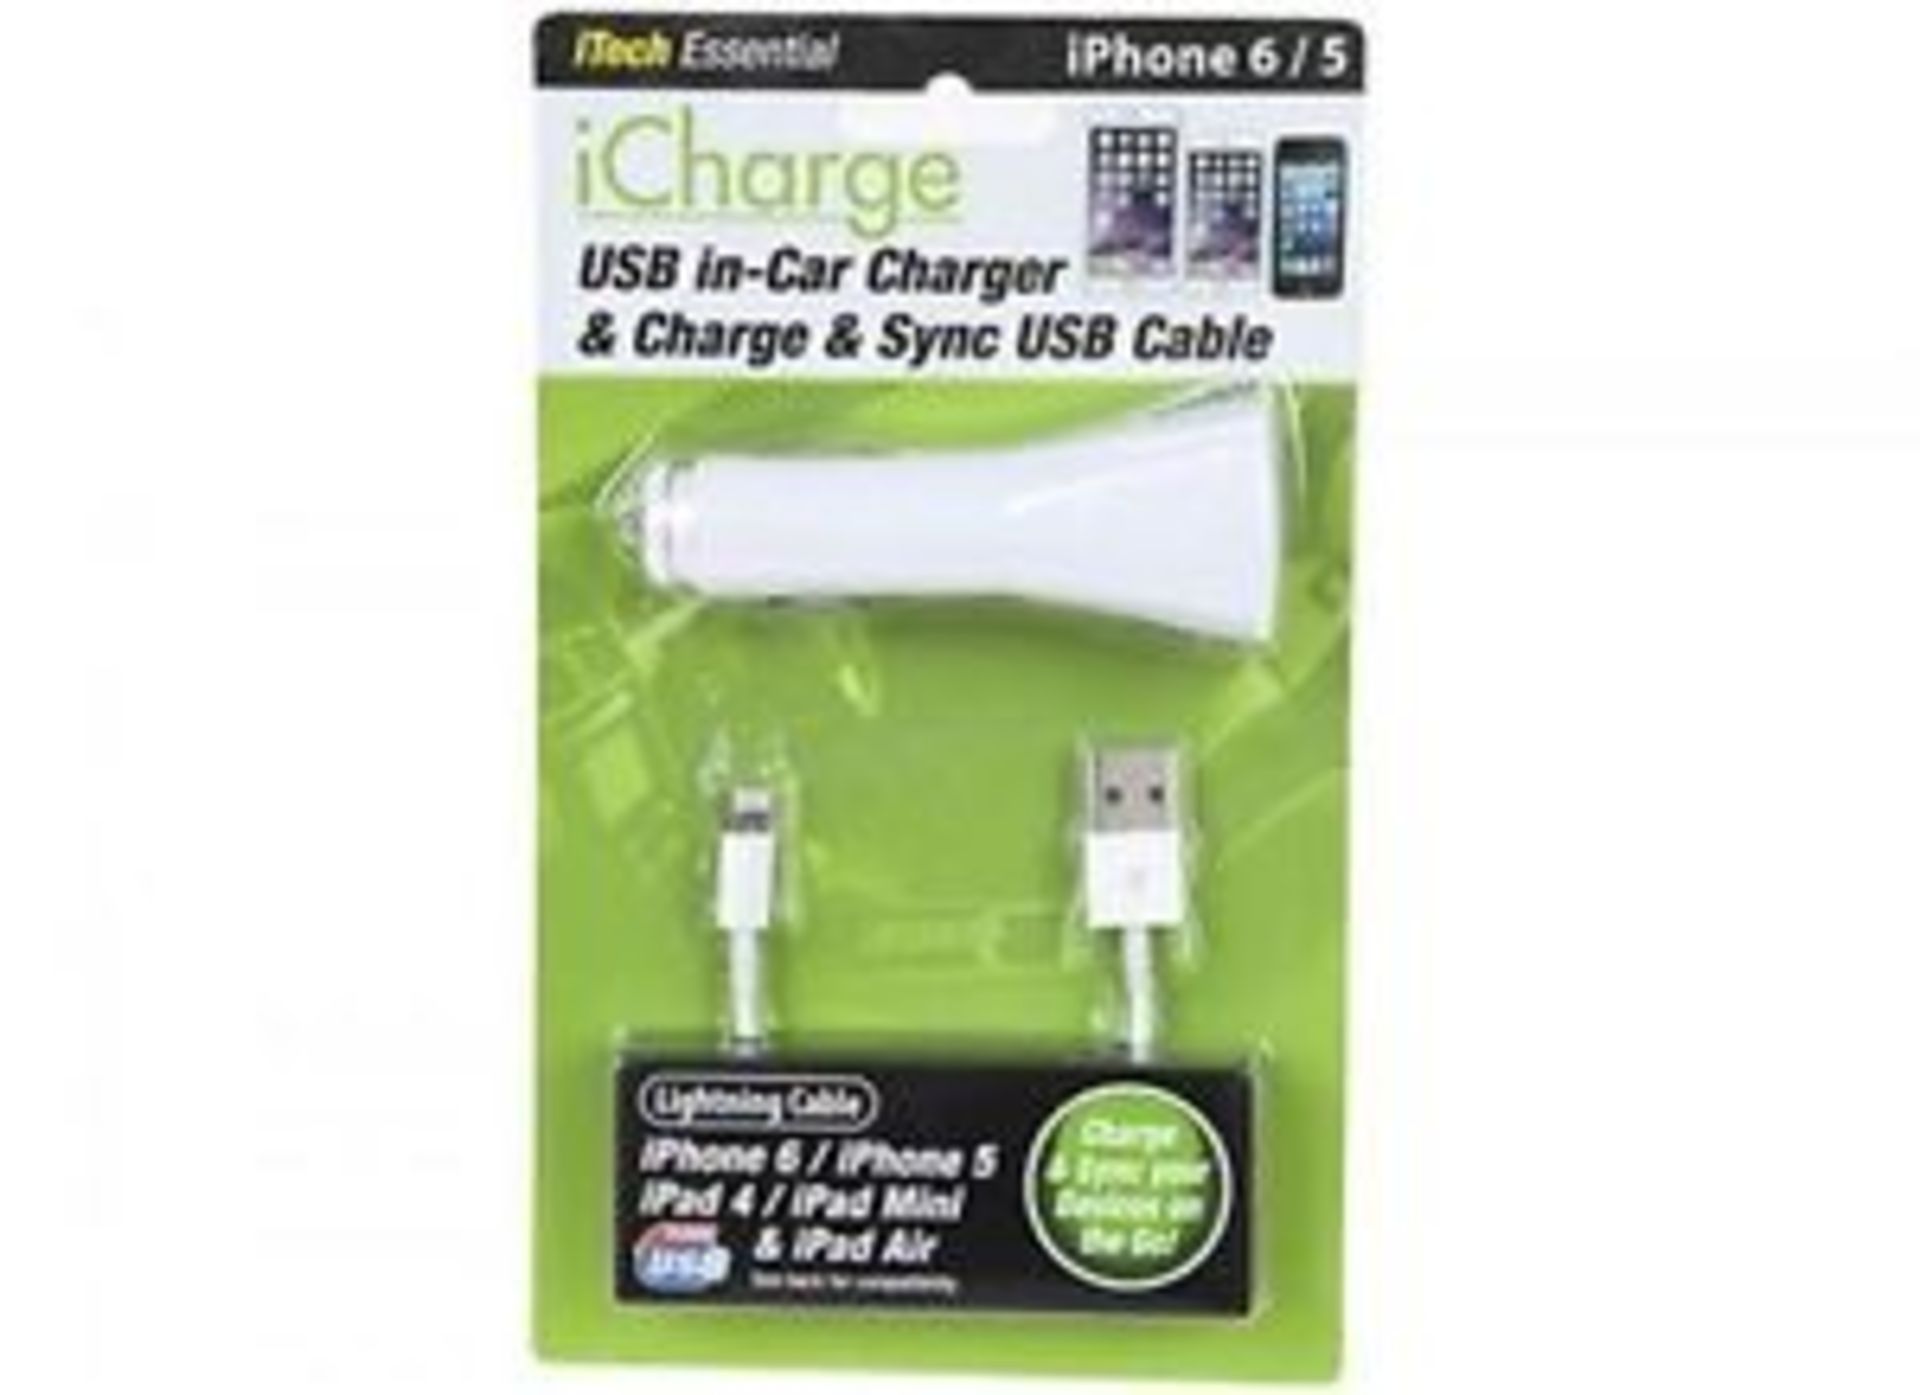 V Brand New JuiceBANK USB In car charger with lightening cable for iphone 5 and 6 X 2 YOUR BID PRICE